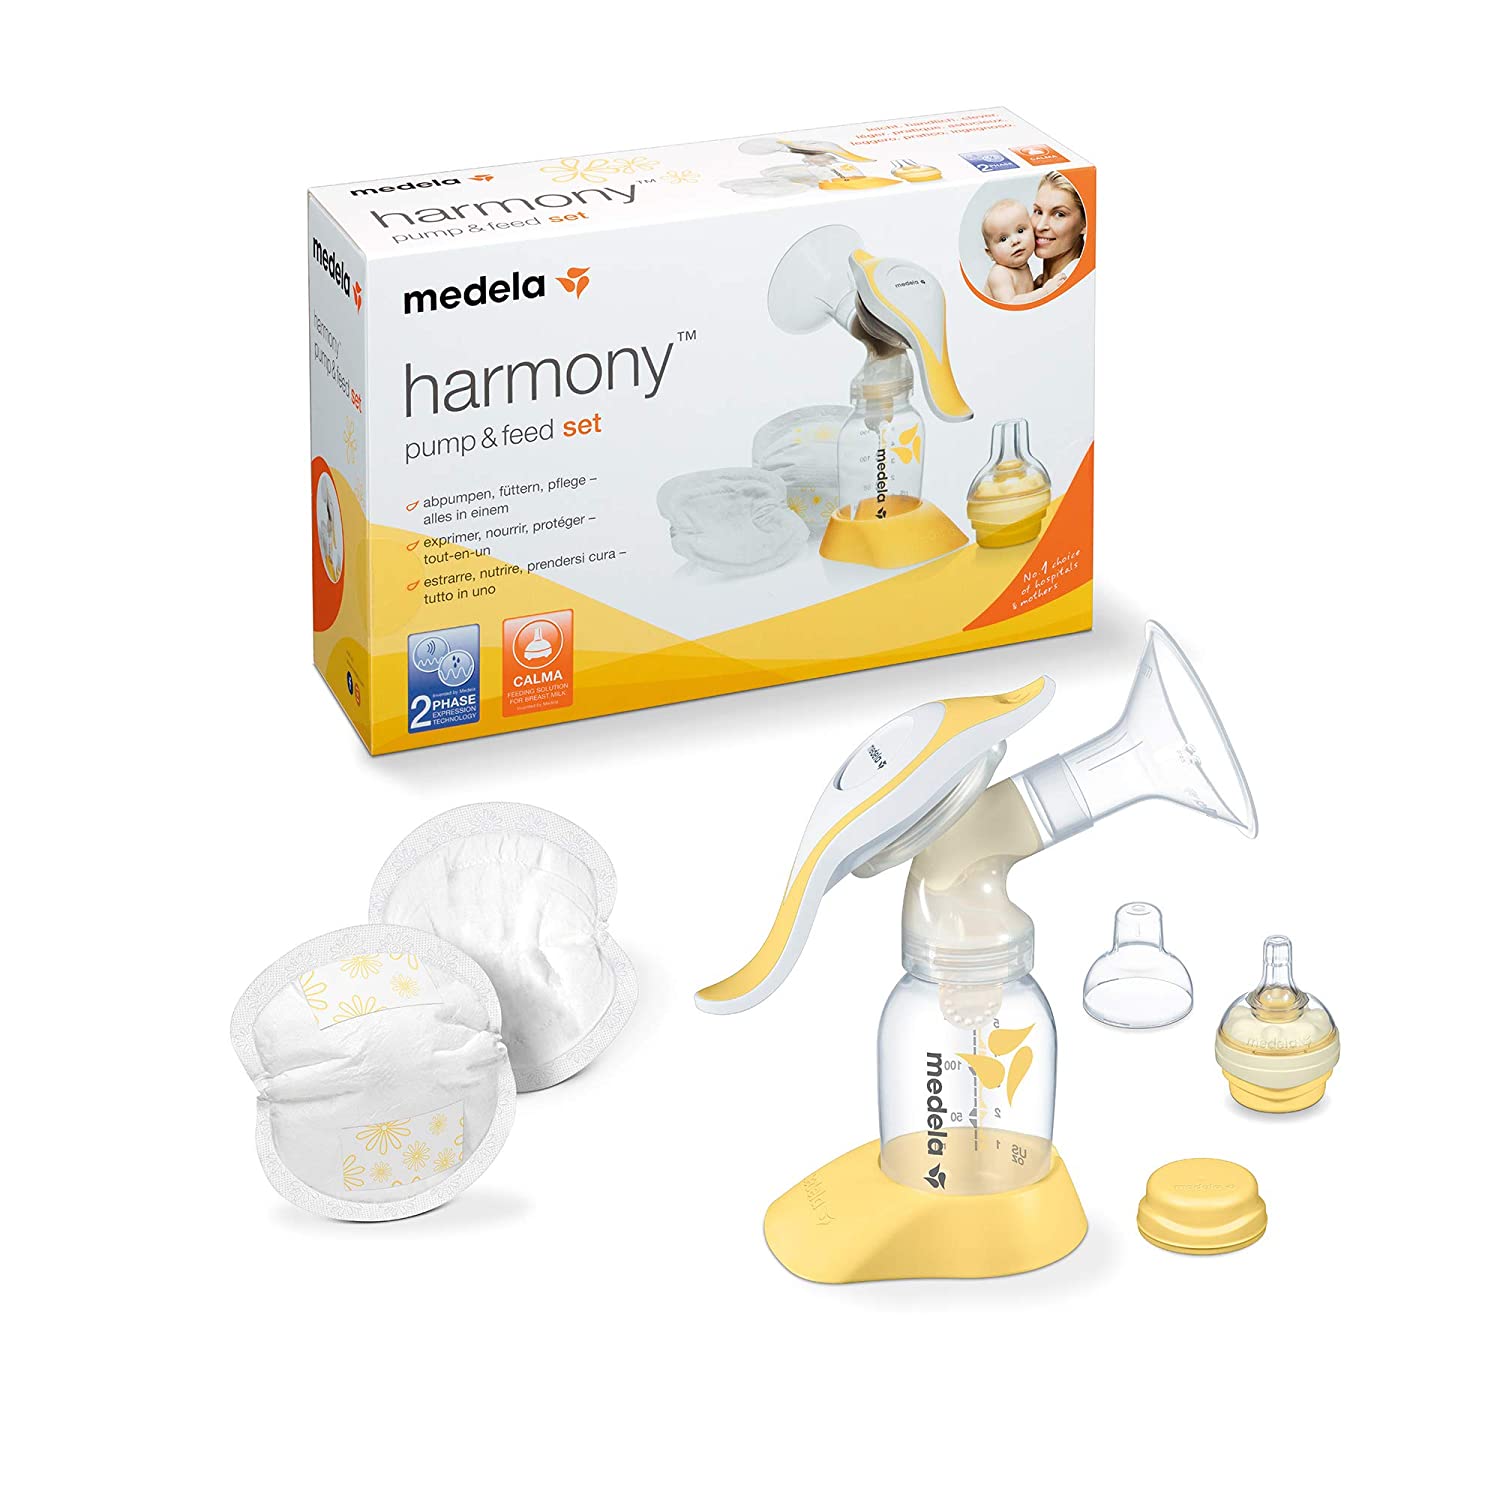 Medela Harmony Manual Breast Pump, Particularly Light, Gentle and Efficient